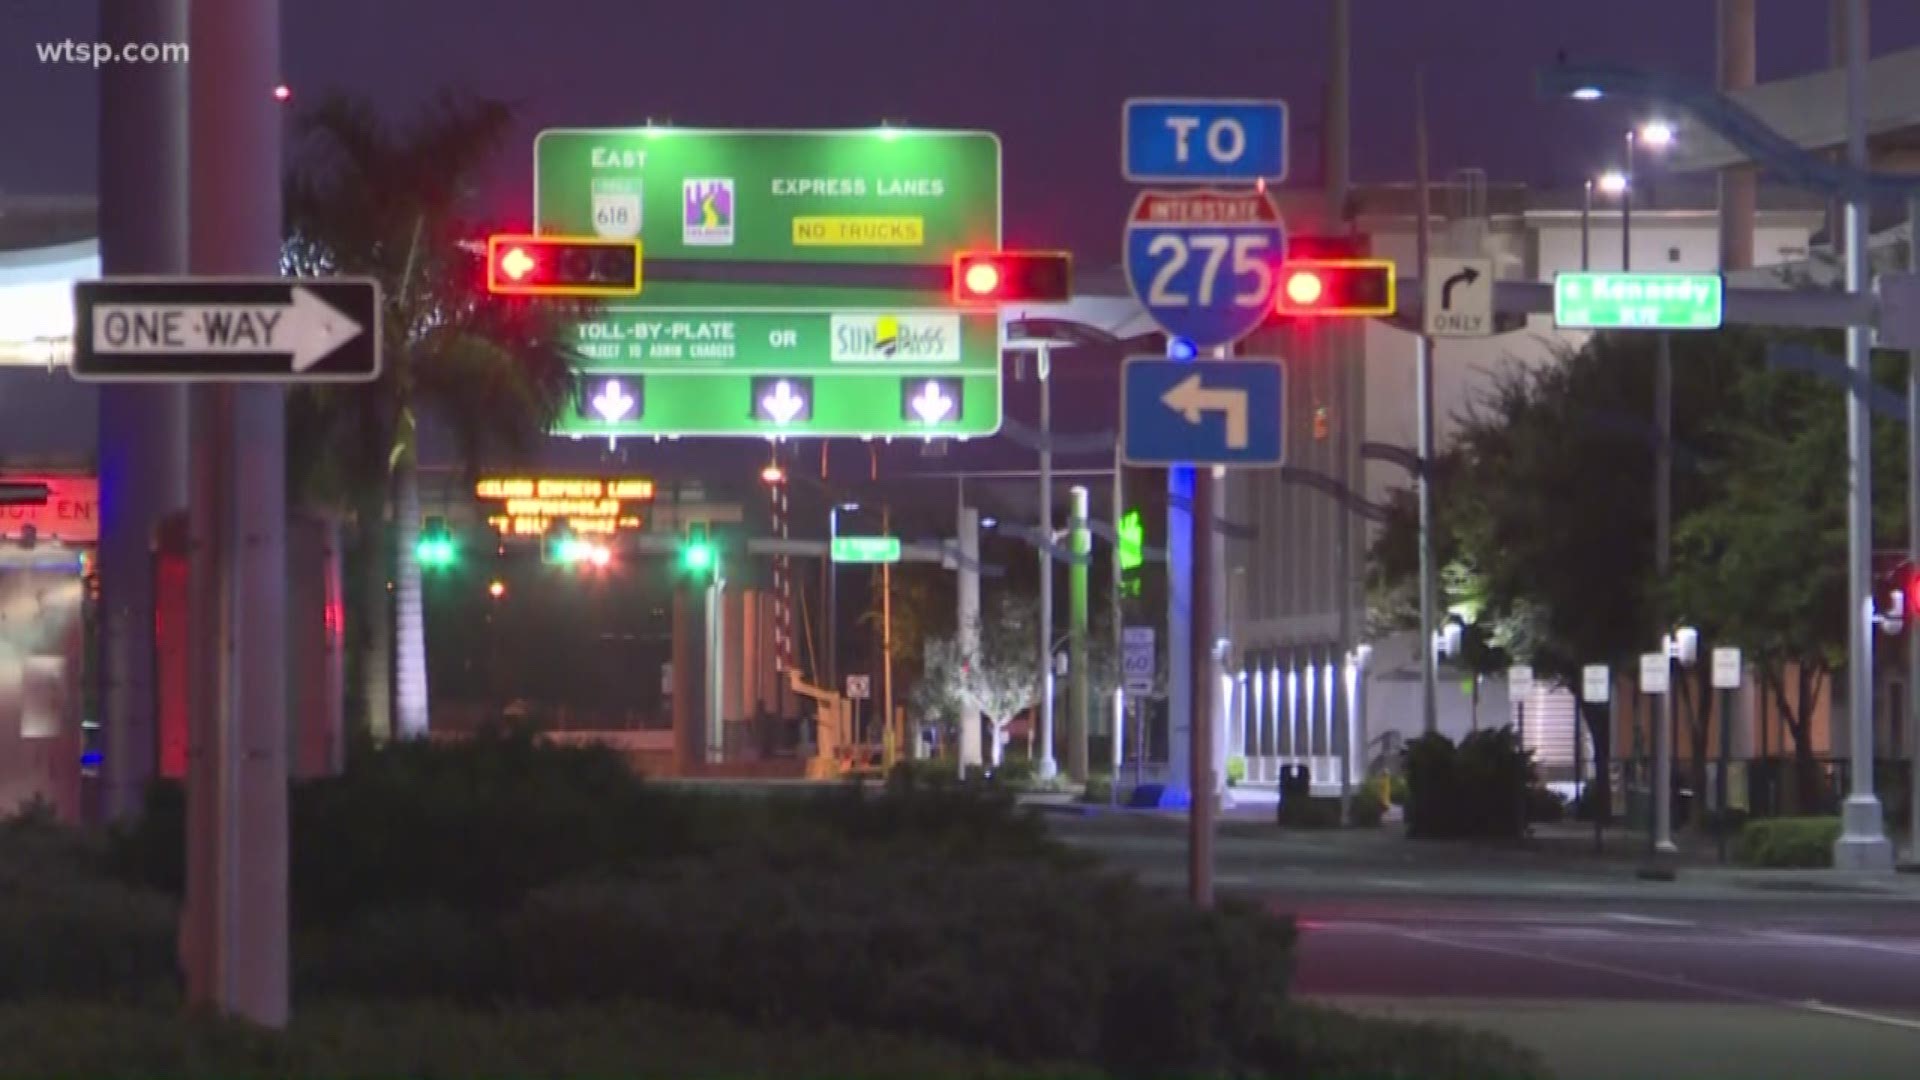 Officials say that you are still required to pay tolls on Florida highways.